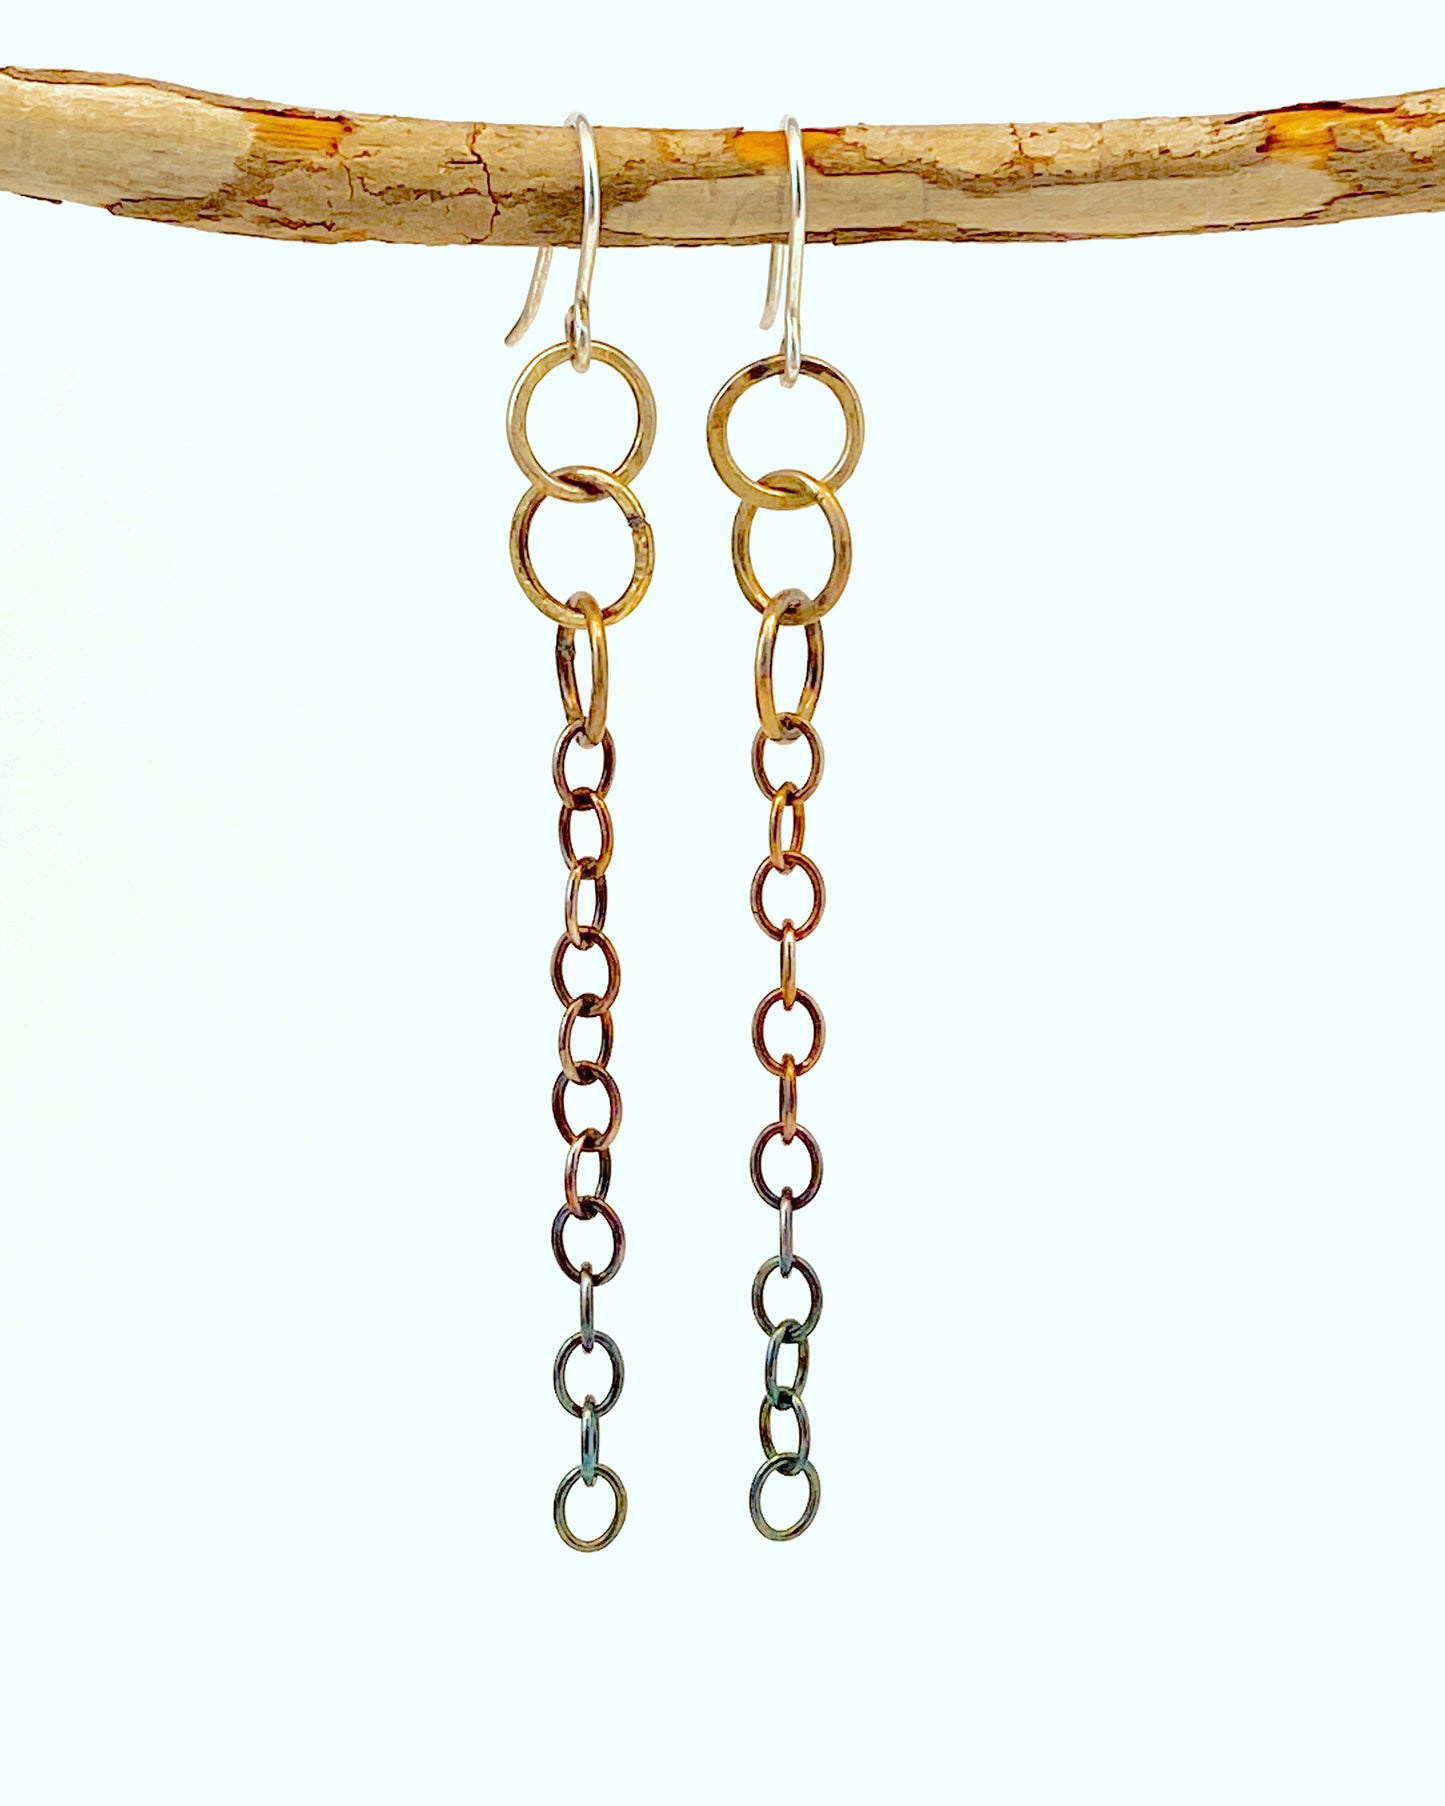 Hand-crafted earrings; unique design.  Elegant chain drops from three larger links. Sterling silver oxidized with ombré effect - silver at top, black at bottom. Hung on handmade ear wires. Style: rustic, boho, elemental, earthy yet elegant